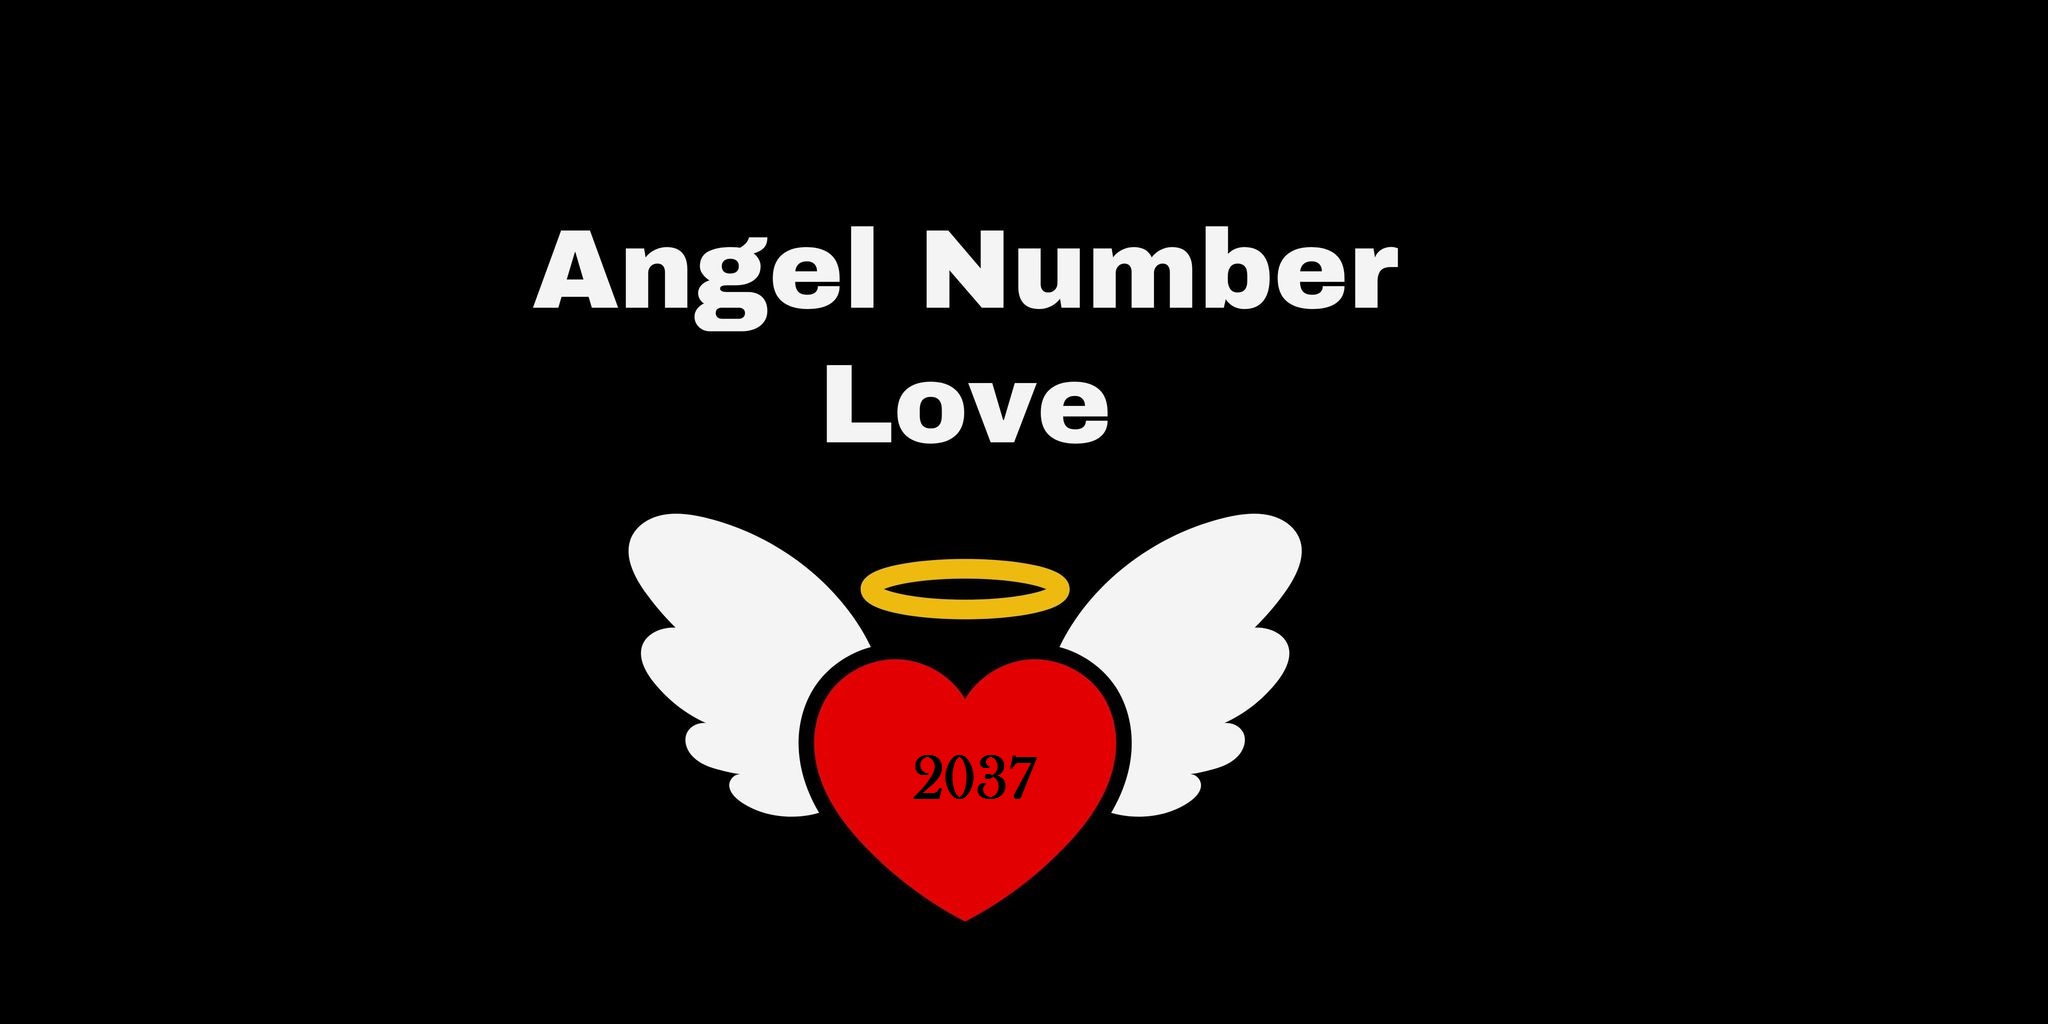 2037 Angel Number Meaning In Love